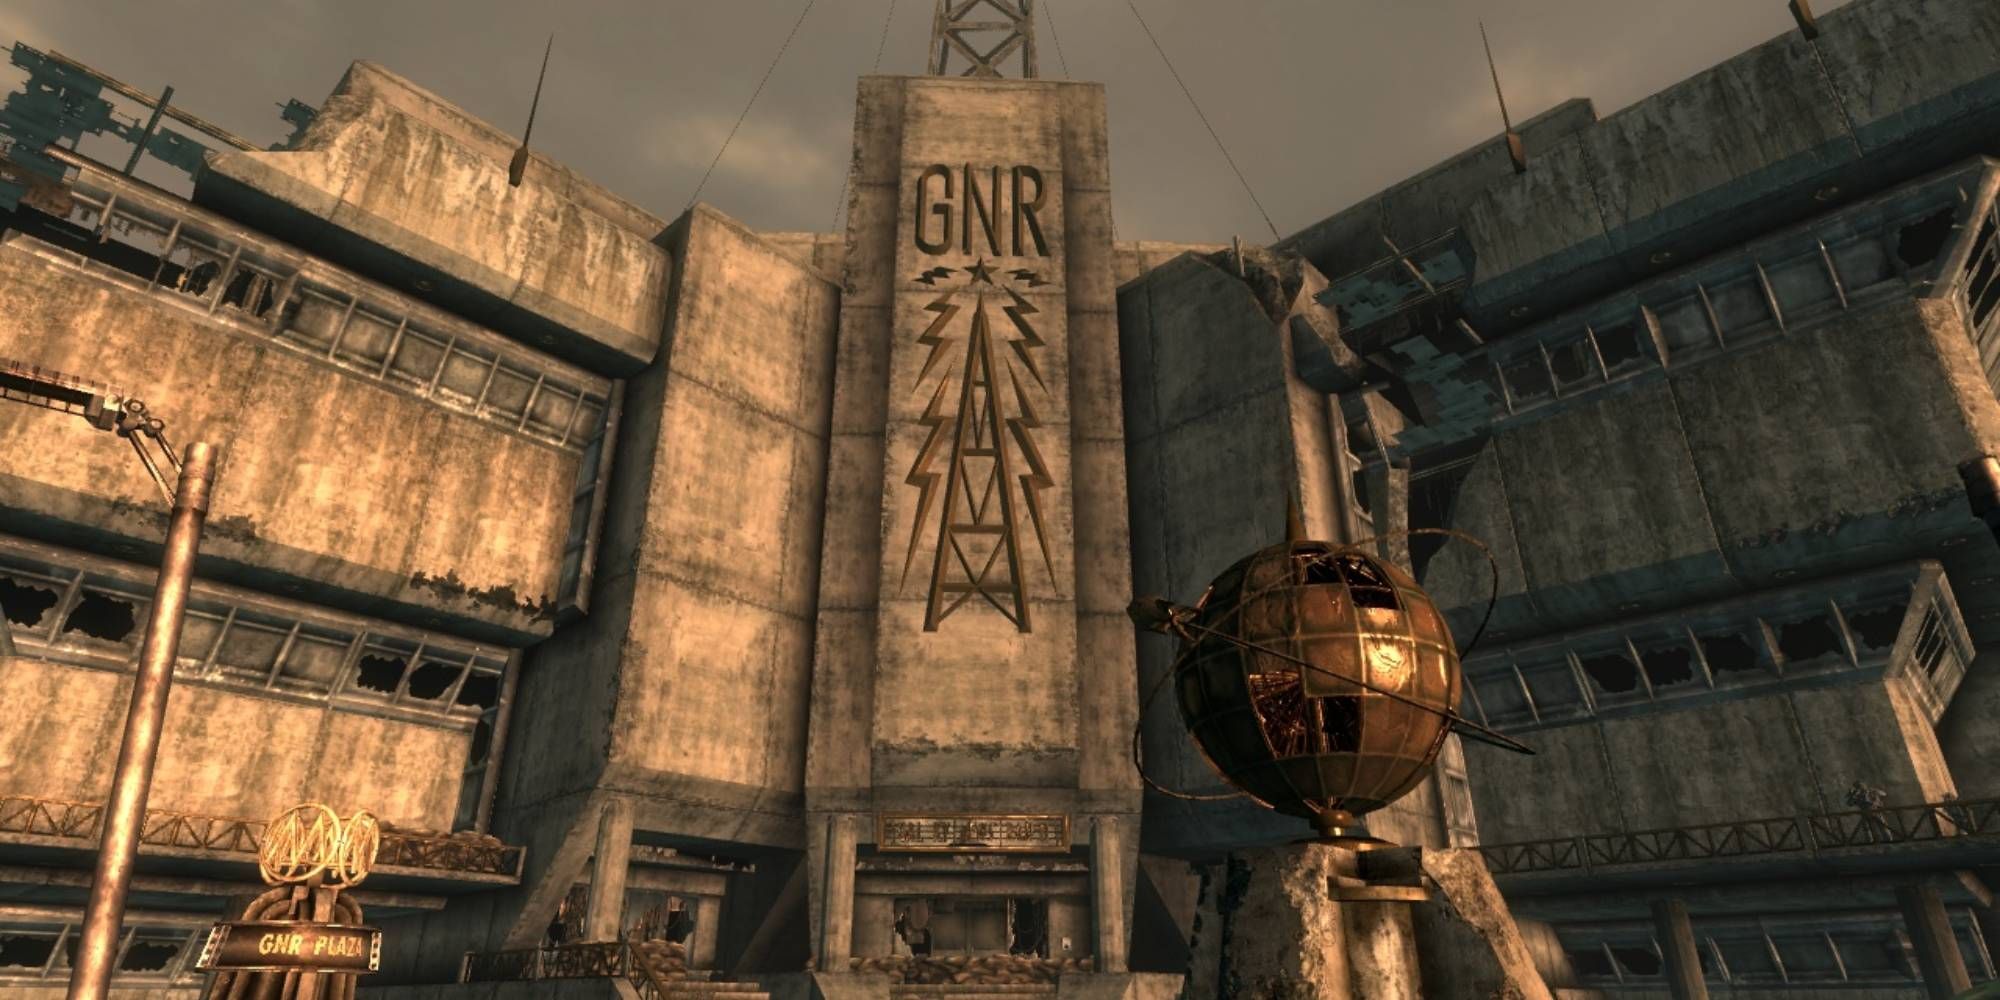 Galaxy News Radio building from Fallout 3